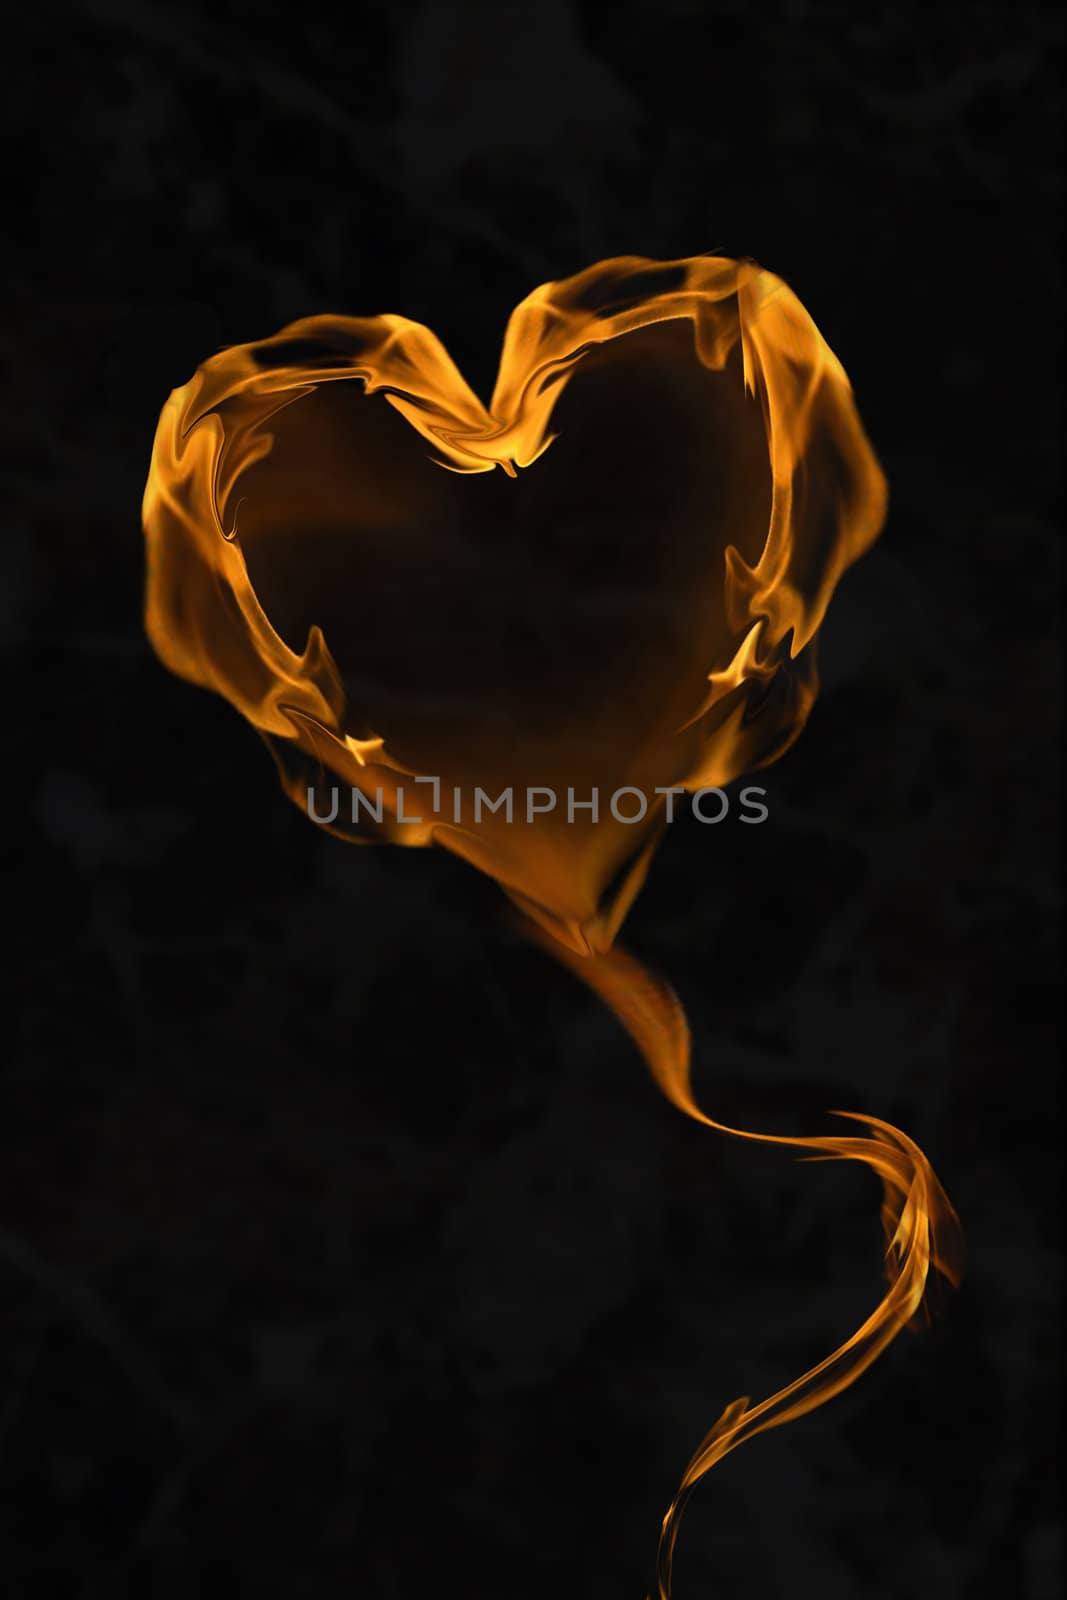 heart created with flames on a black background